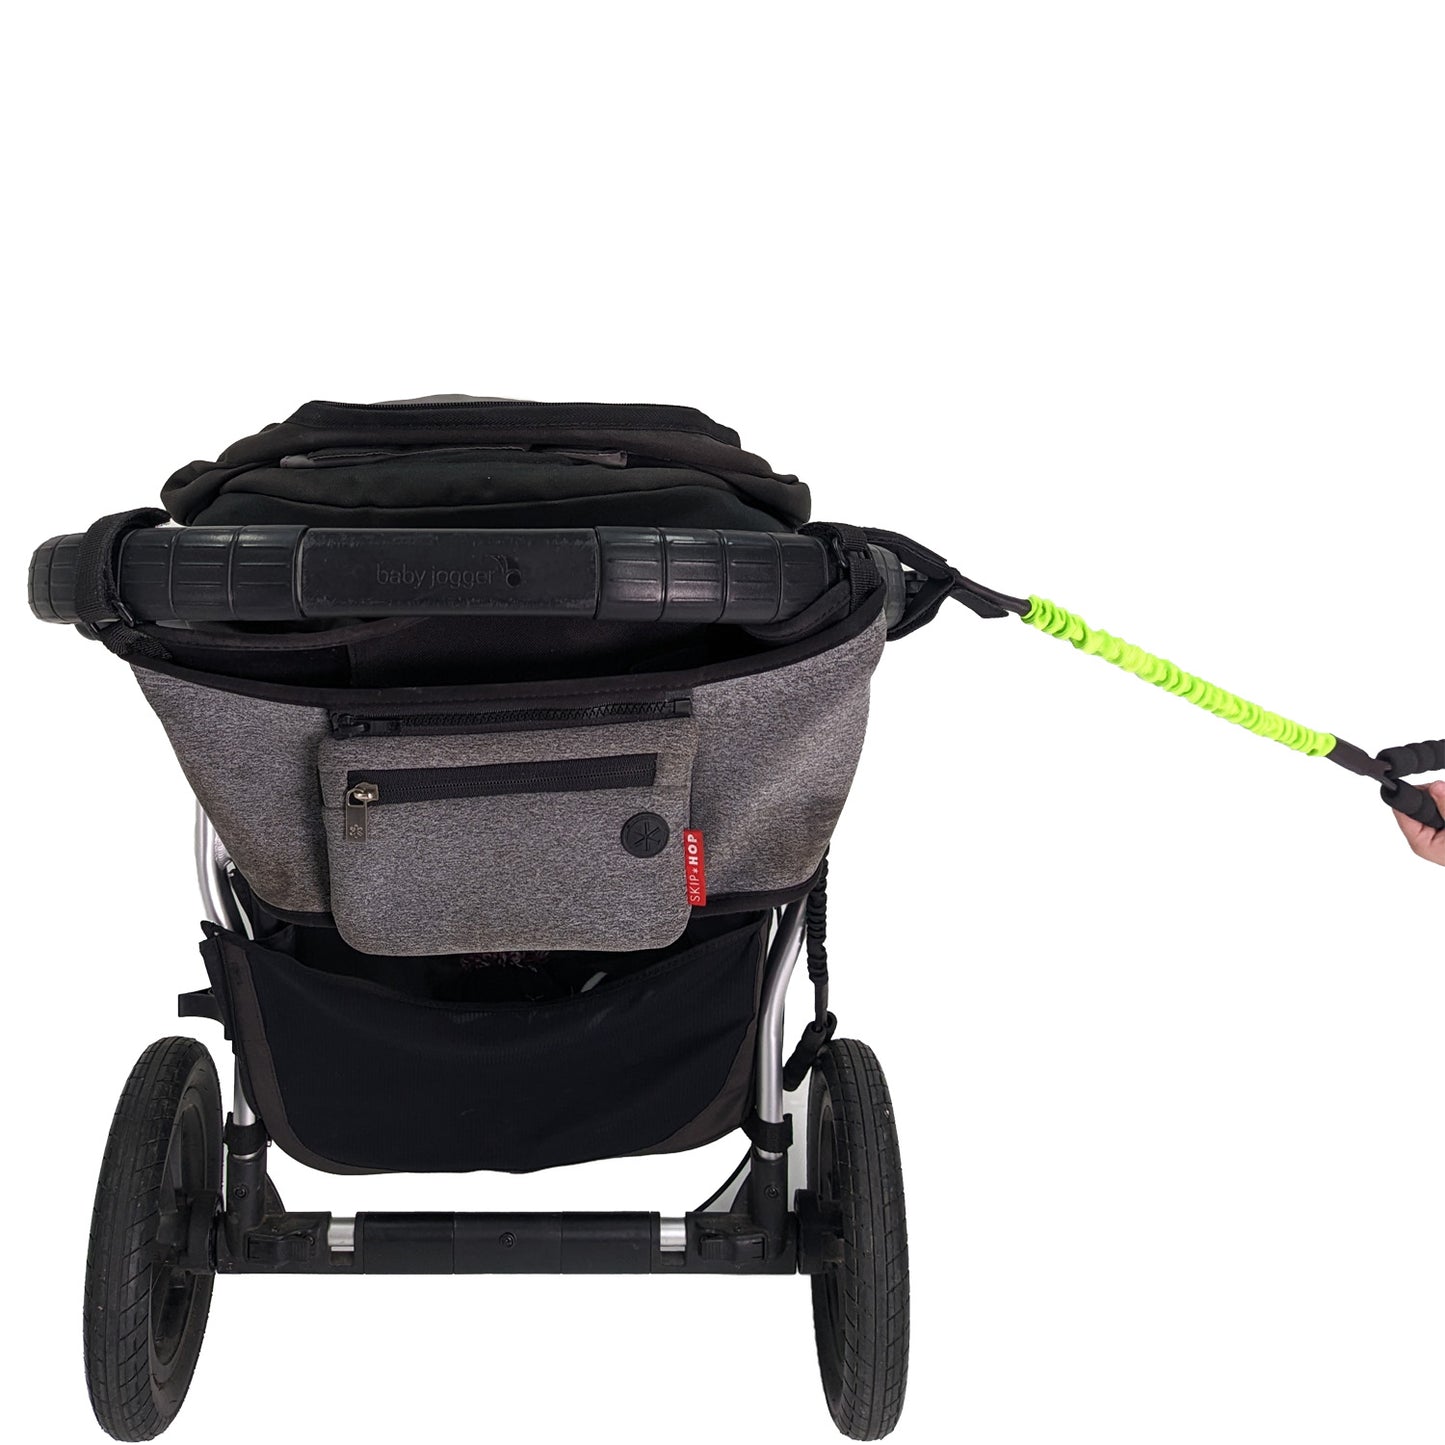 Strollmate Stroller Accessory | Adjustable Strap Attaches To Strollers, Wagons, Diaper Bags